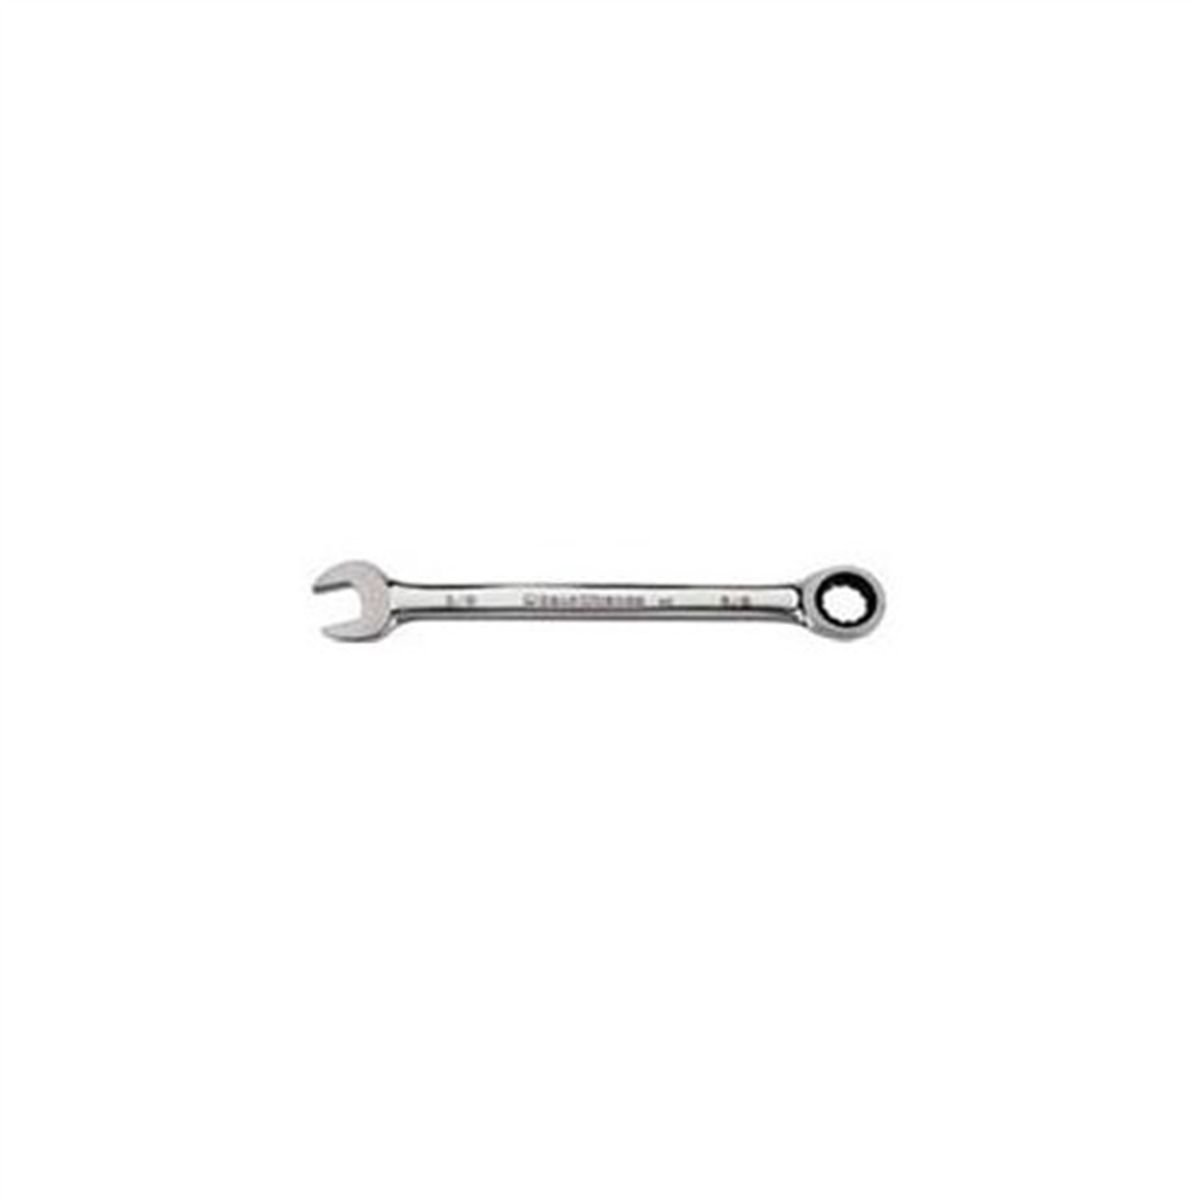 Wrench Ratcheting Combination - 19mm Gearwrench